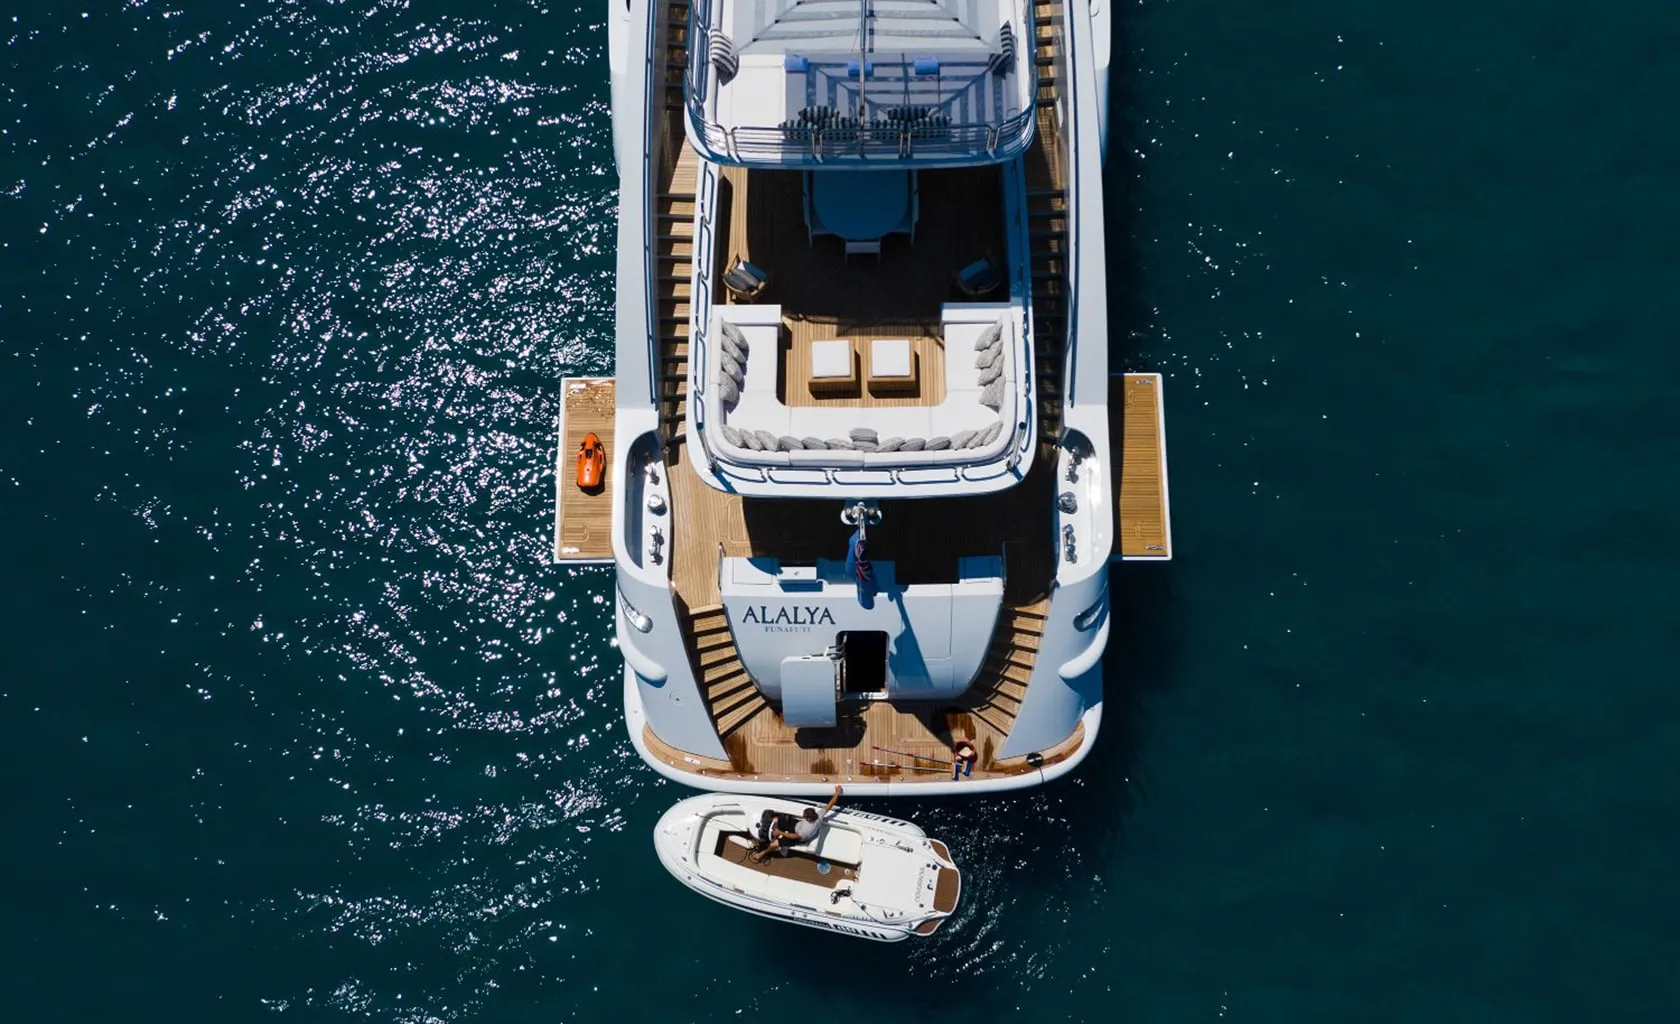 On these yachts you will have a luxury experience